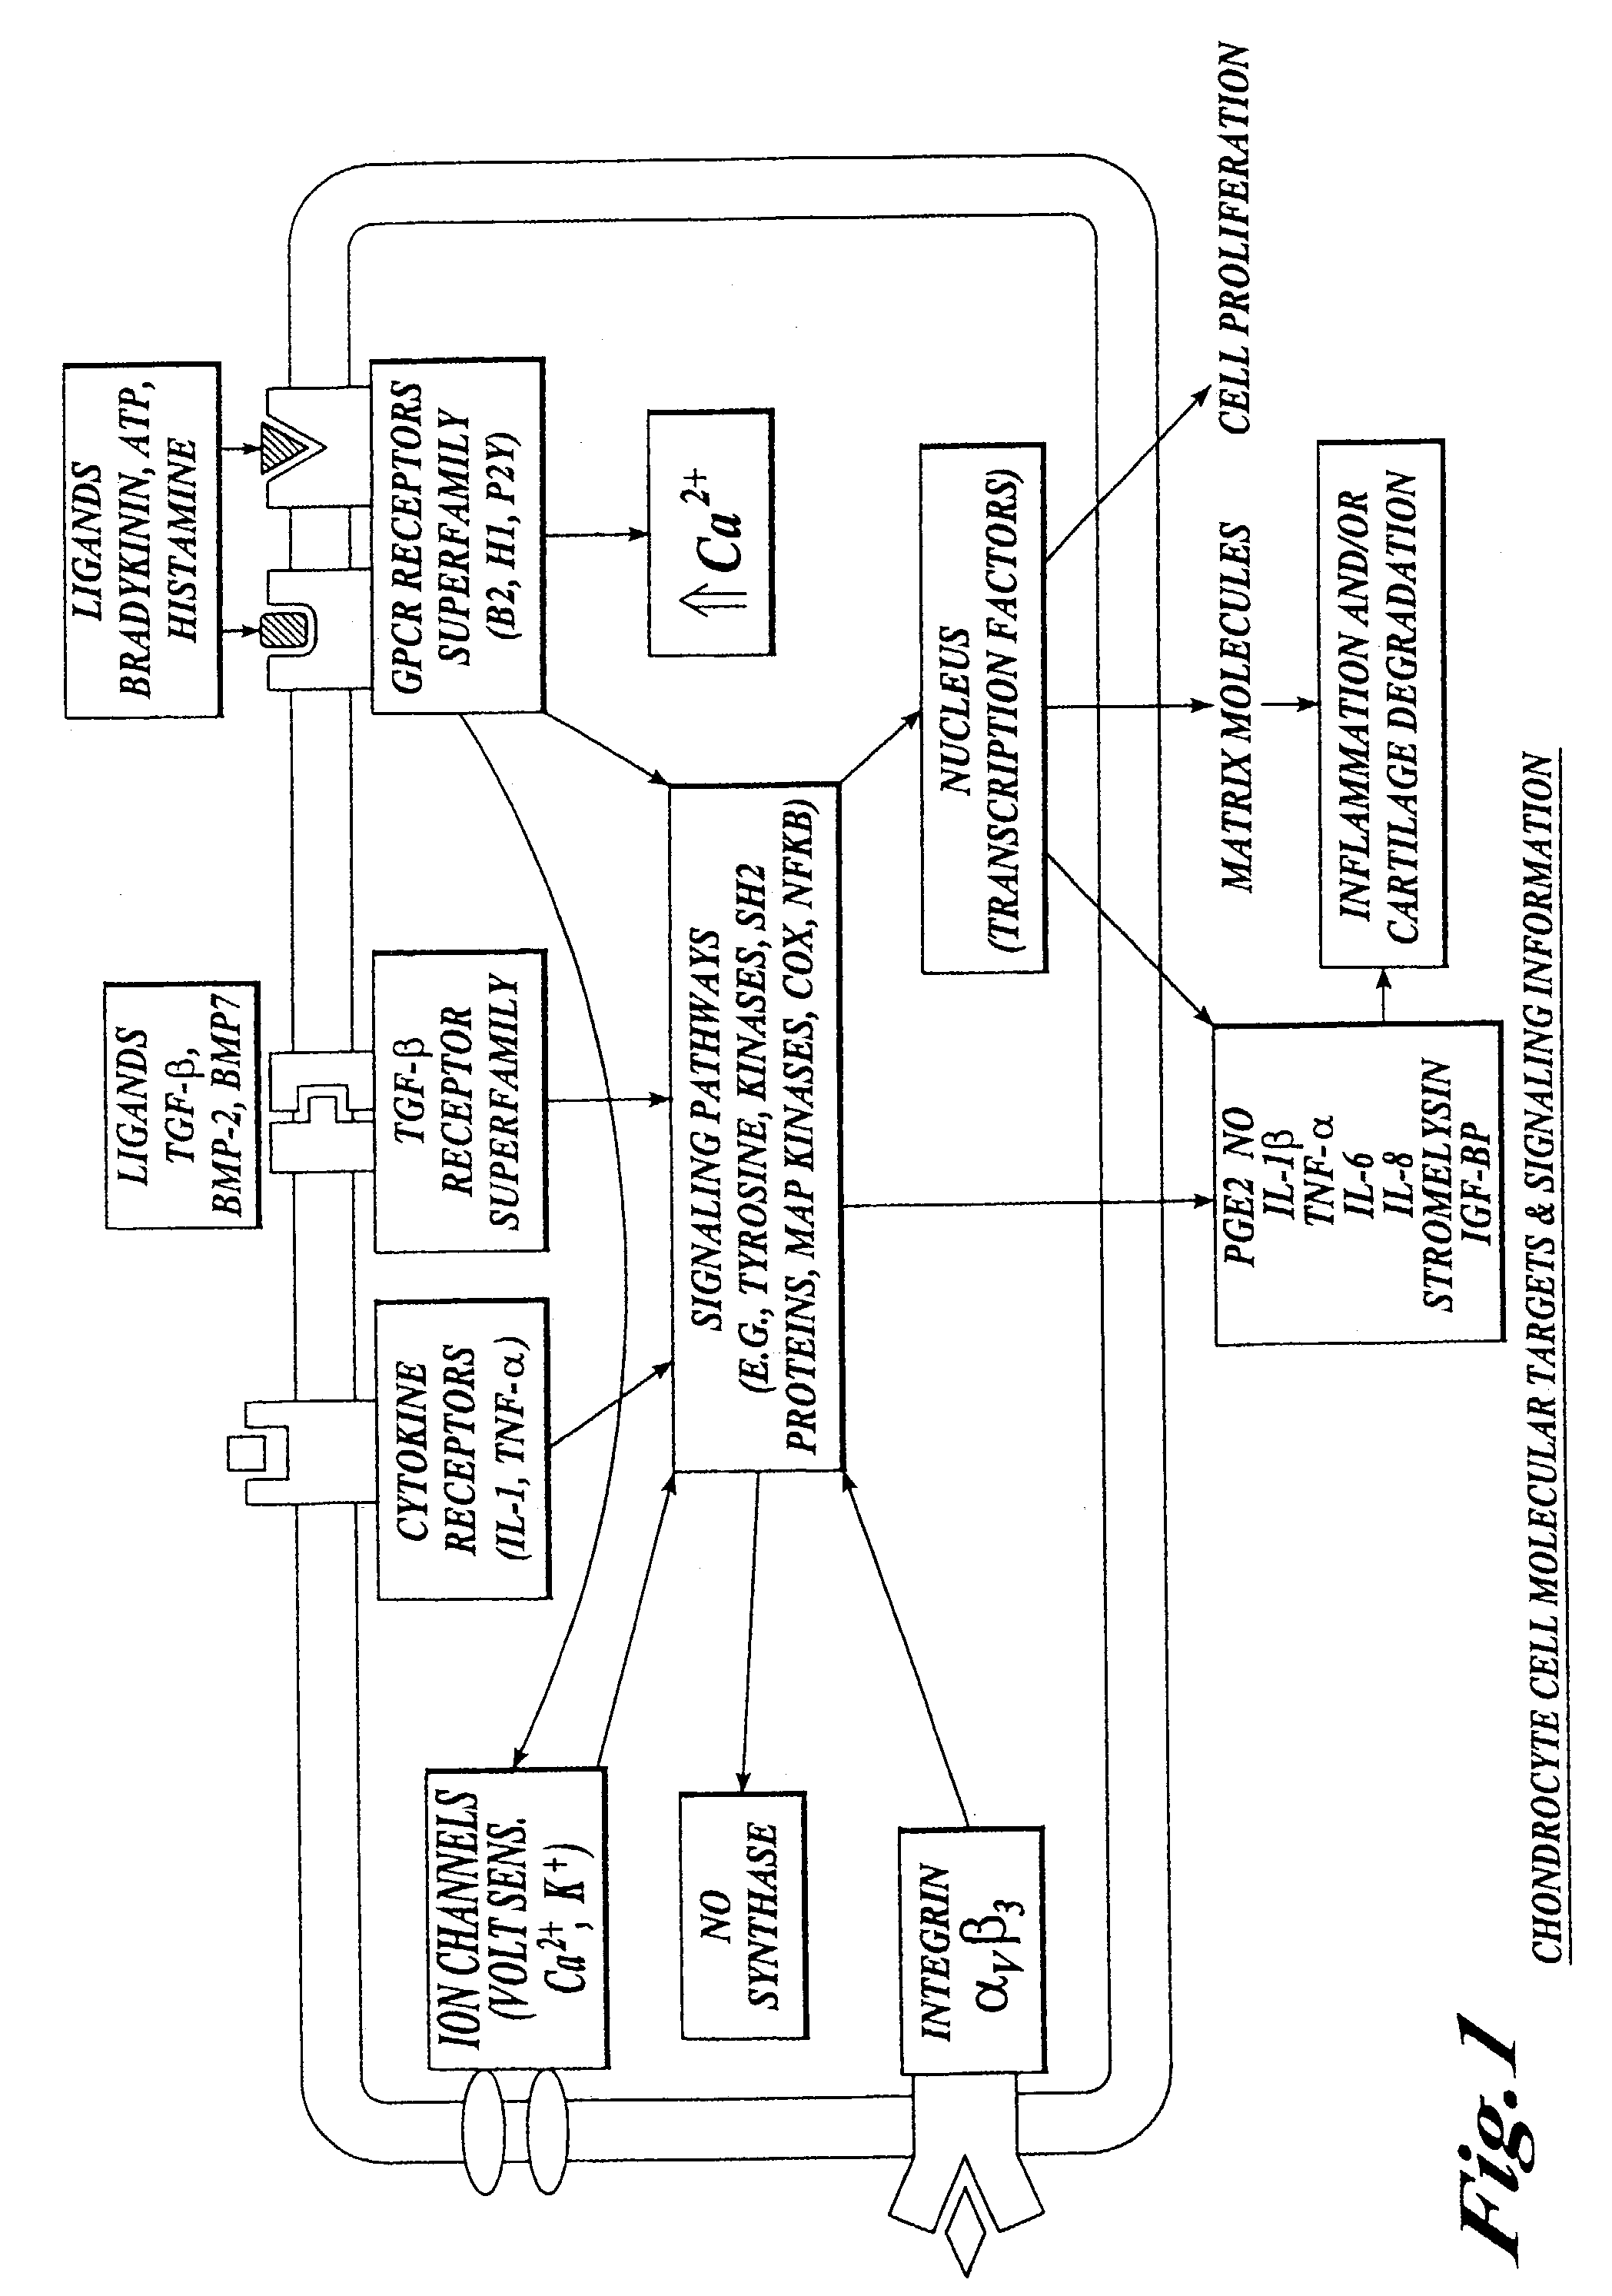 Compositions and methods for systemic inhibition of cartilage degradation